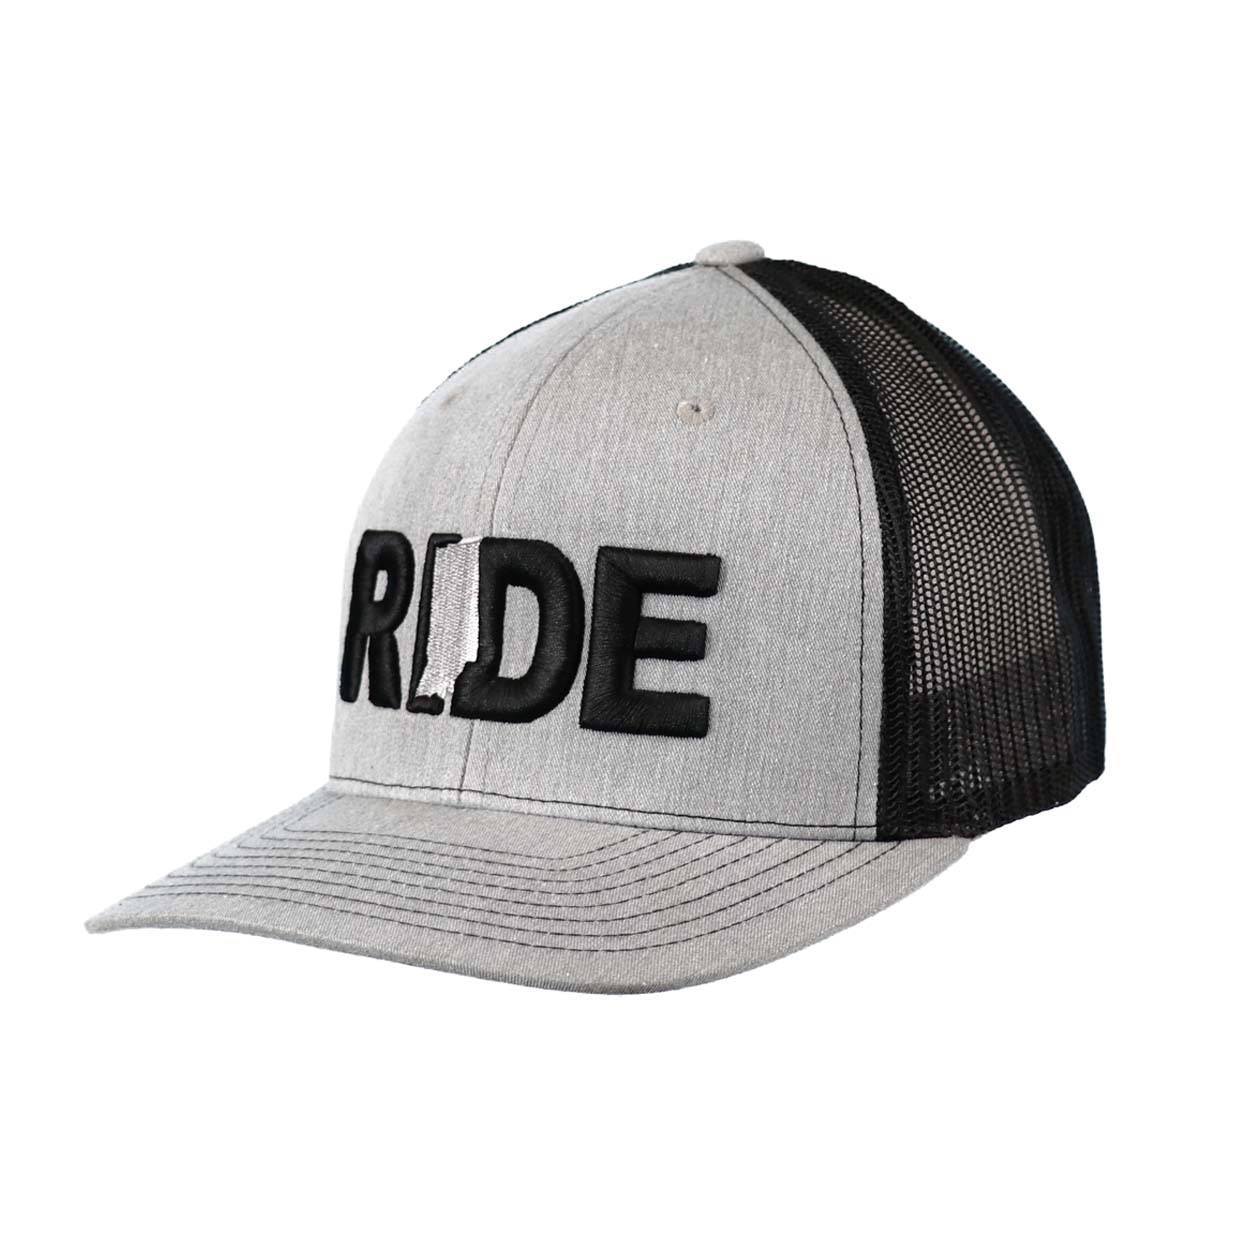 Ride Indiana Classic Pro 3D Puff Embroidered Snapback Trucker Hat Heather Gray/Black